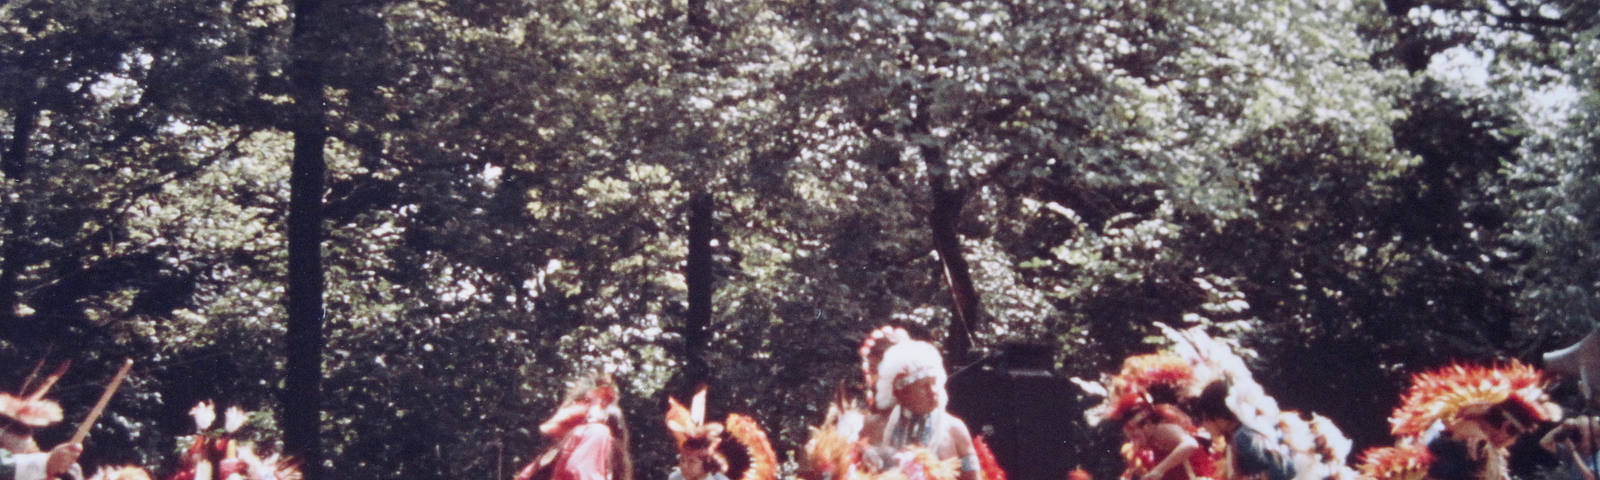 Photo of American Indians dancing during a powwow.